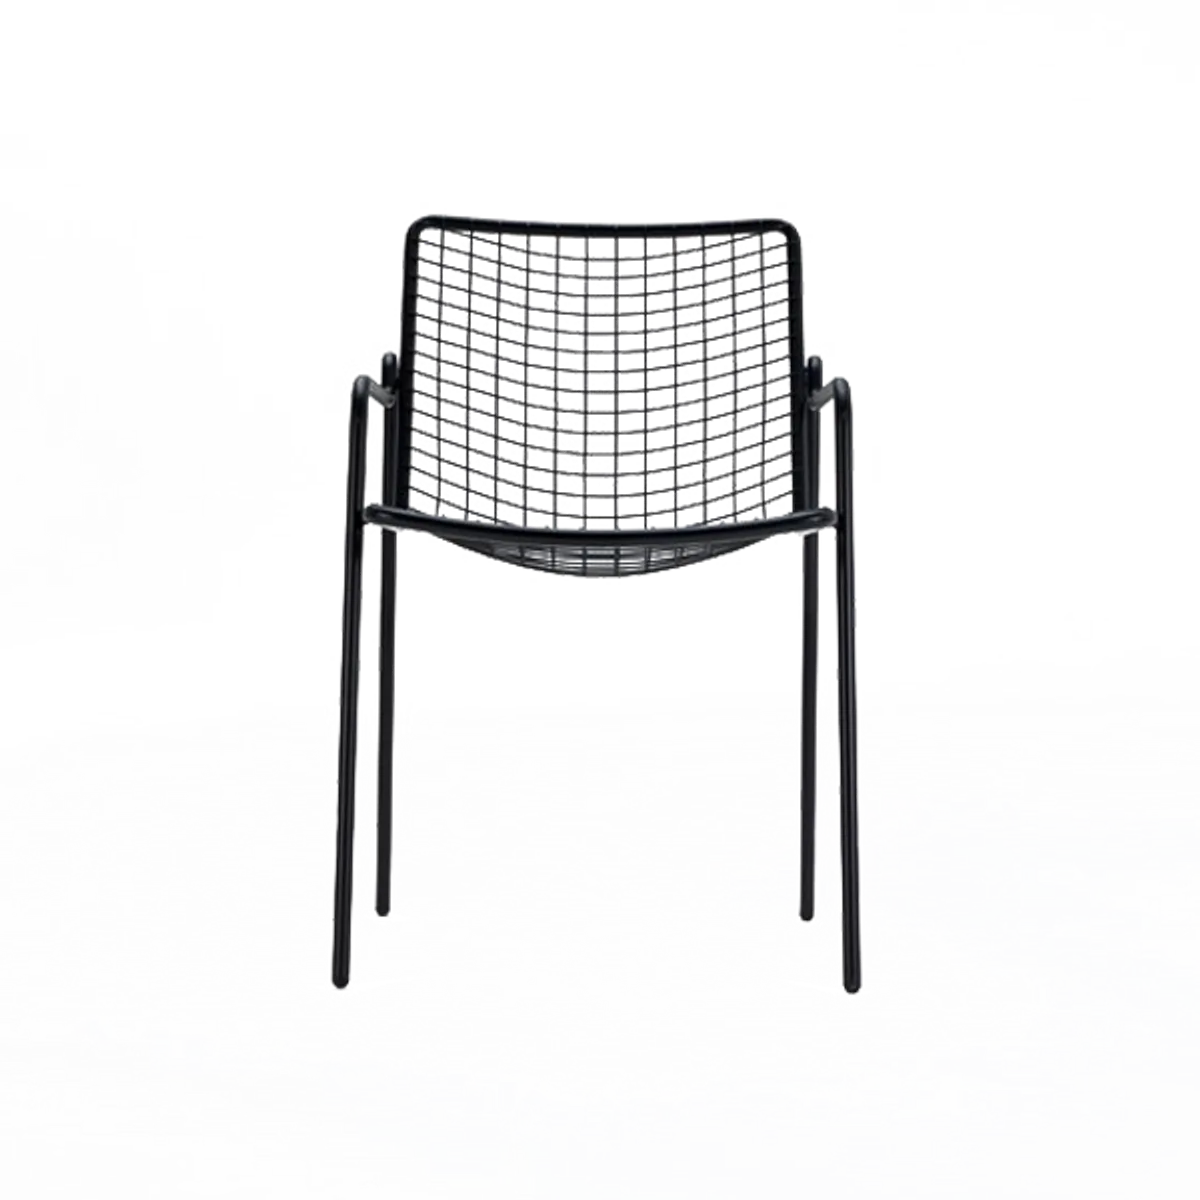 Rio Armchair Inside Out Contracts